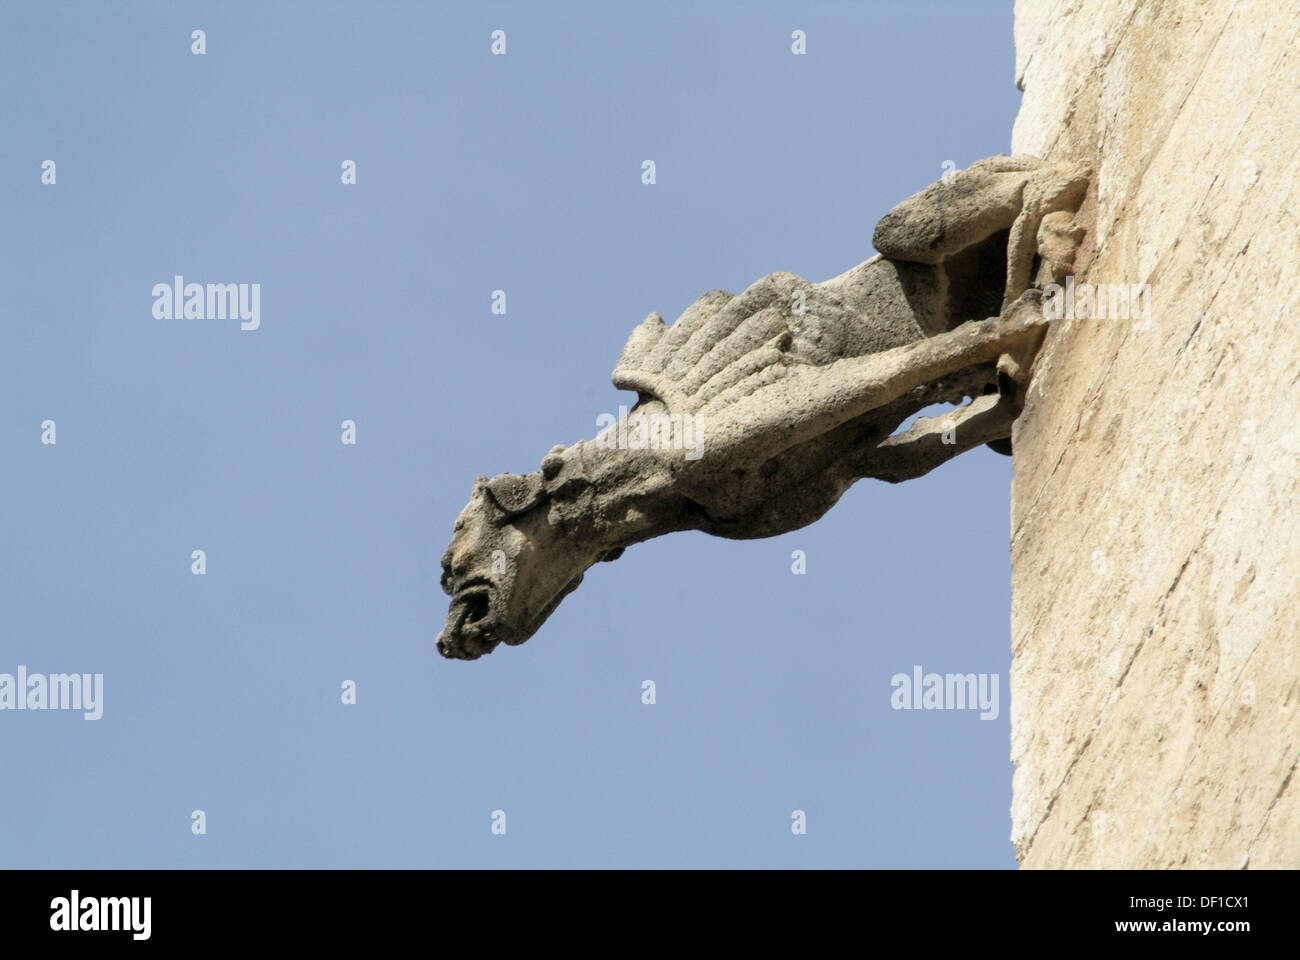 Collegiate Church 14th 15th Cent Catalan Aragon Gothic Style Detail Of Gargoyle Declared National Artistic Monument In Stock Photo Alamy